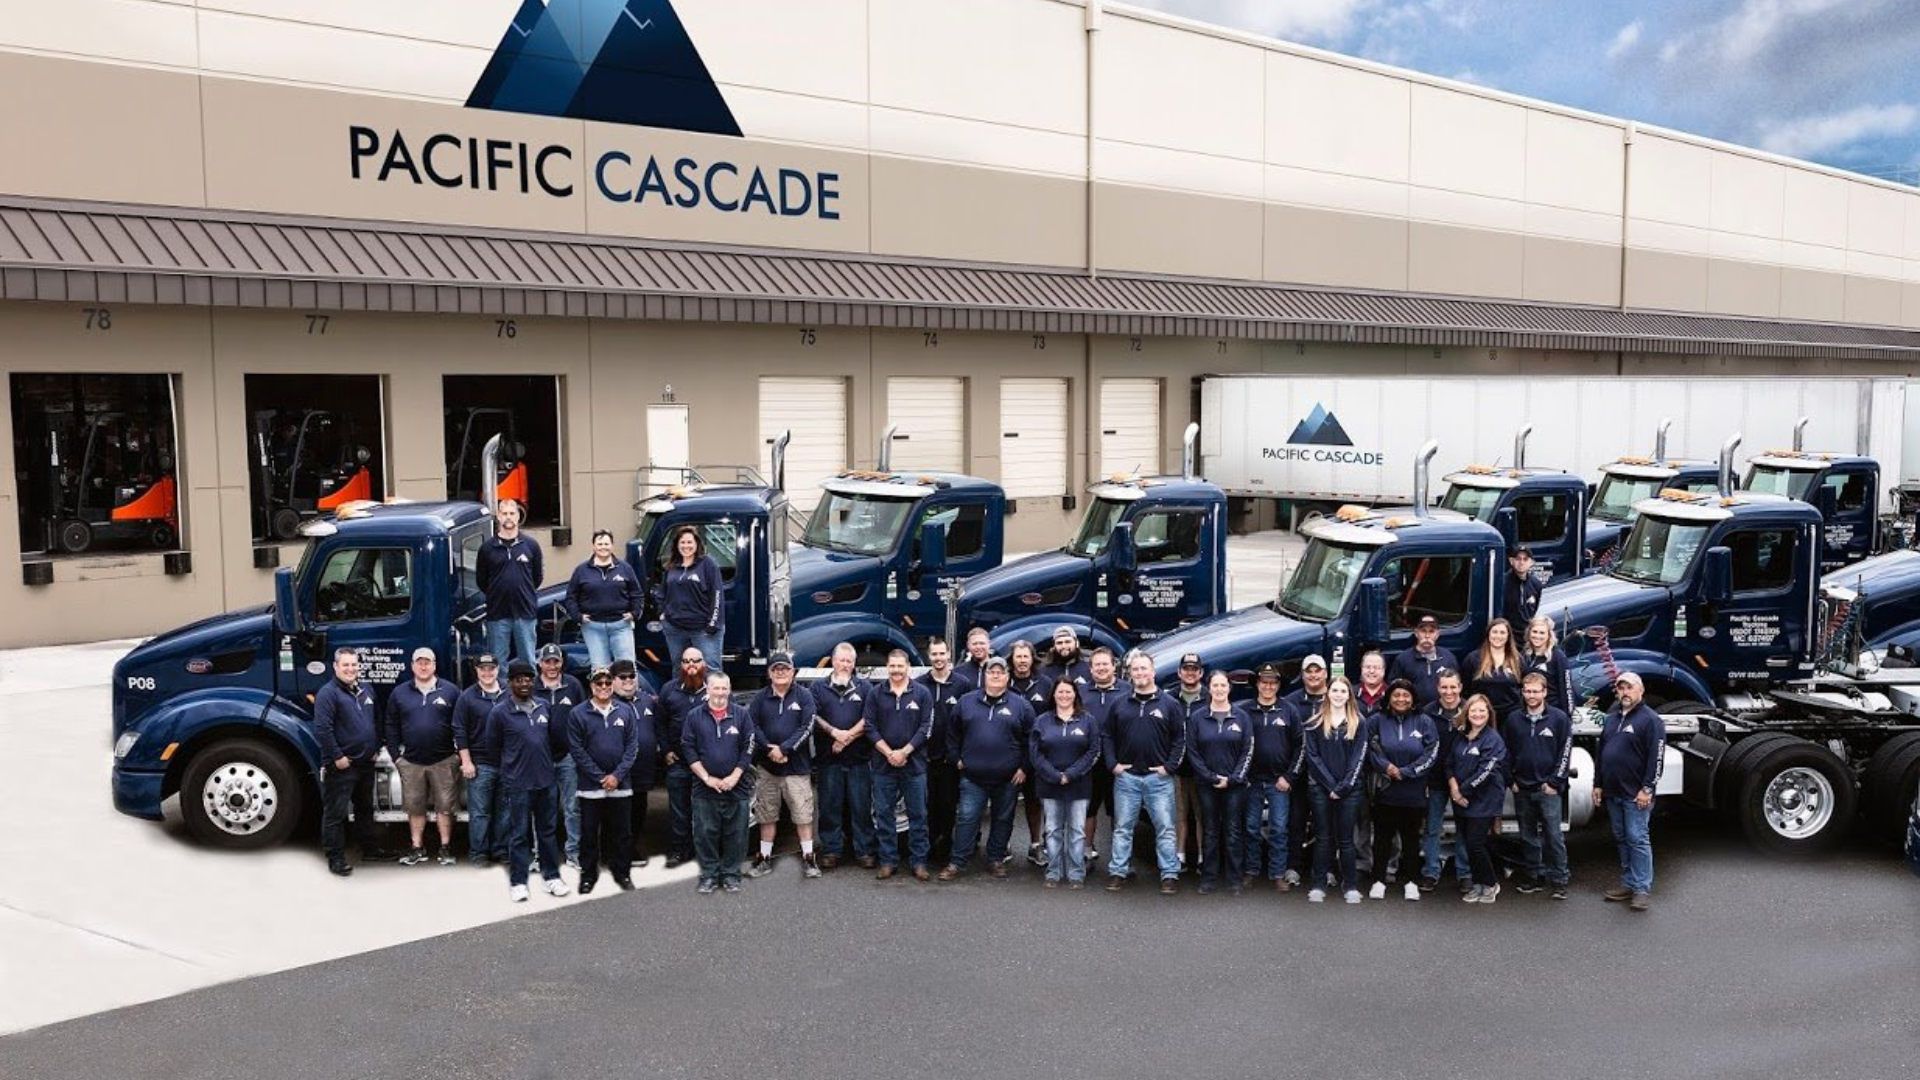 Today, World Distribution Services’ (WDS) parent company World Group, announced the acquisition of Pacific Cascade, comprised of Pacific Cascade Distribution, LLC, and Pacific Cascade Trucking, LLC, both headquartered in Sumner, Washington.